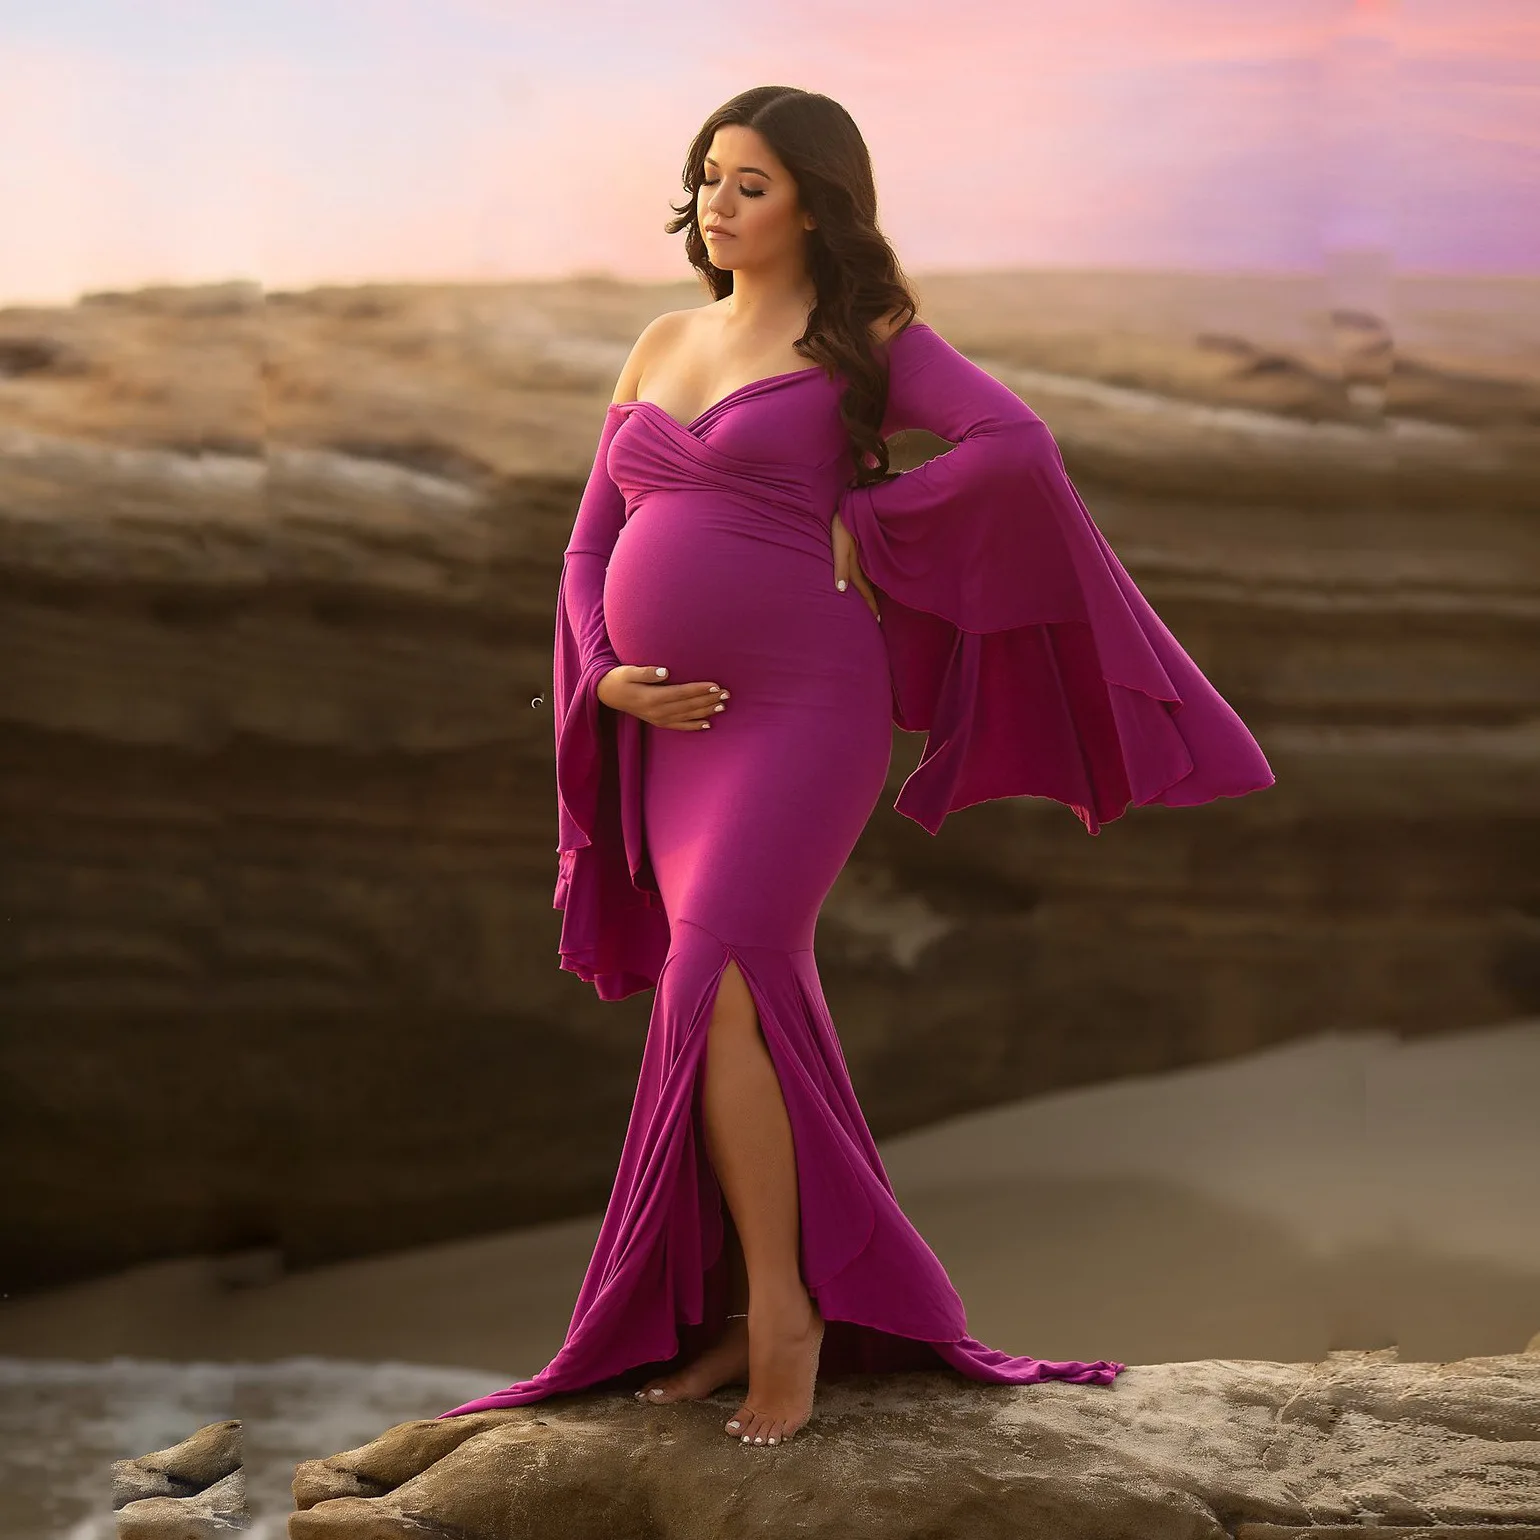 Maternity Dress Photo Shoot Sexy Women Off Shoulder Long Sleeves Mermaid Pregnancy Maxi Gown Dress Baby Shower Photography Prop enlarge